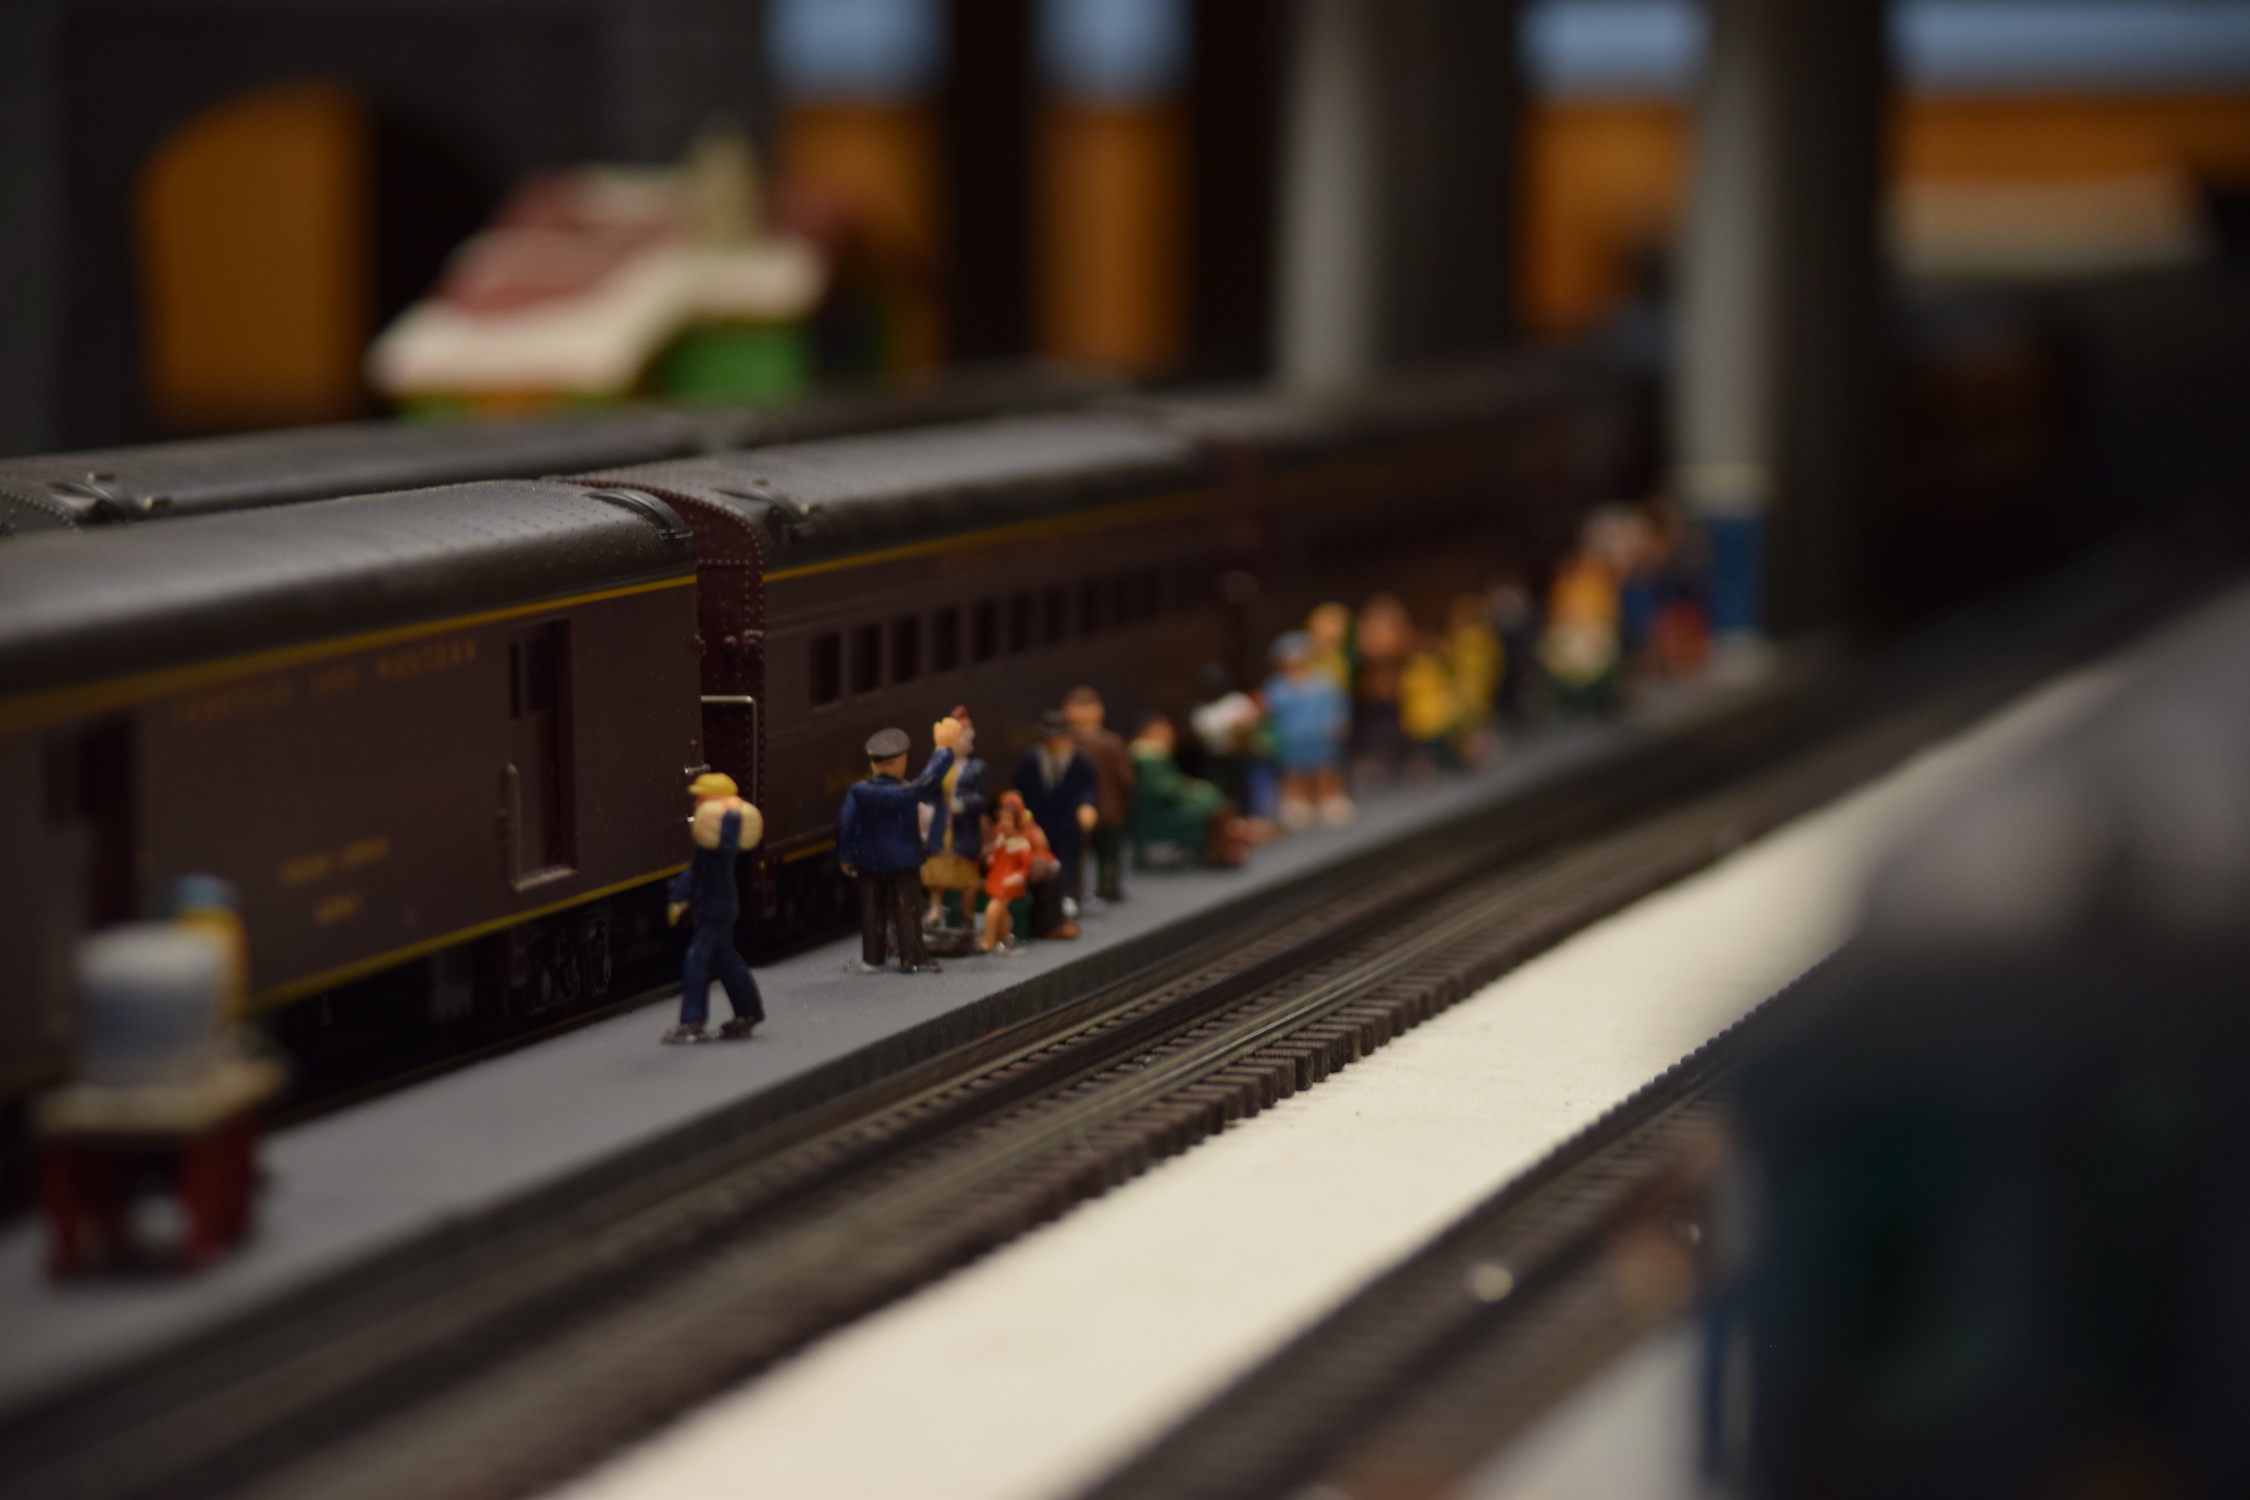 Passengers waiting on a train station platform - "Christmas at the Roundhouse" model train display.